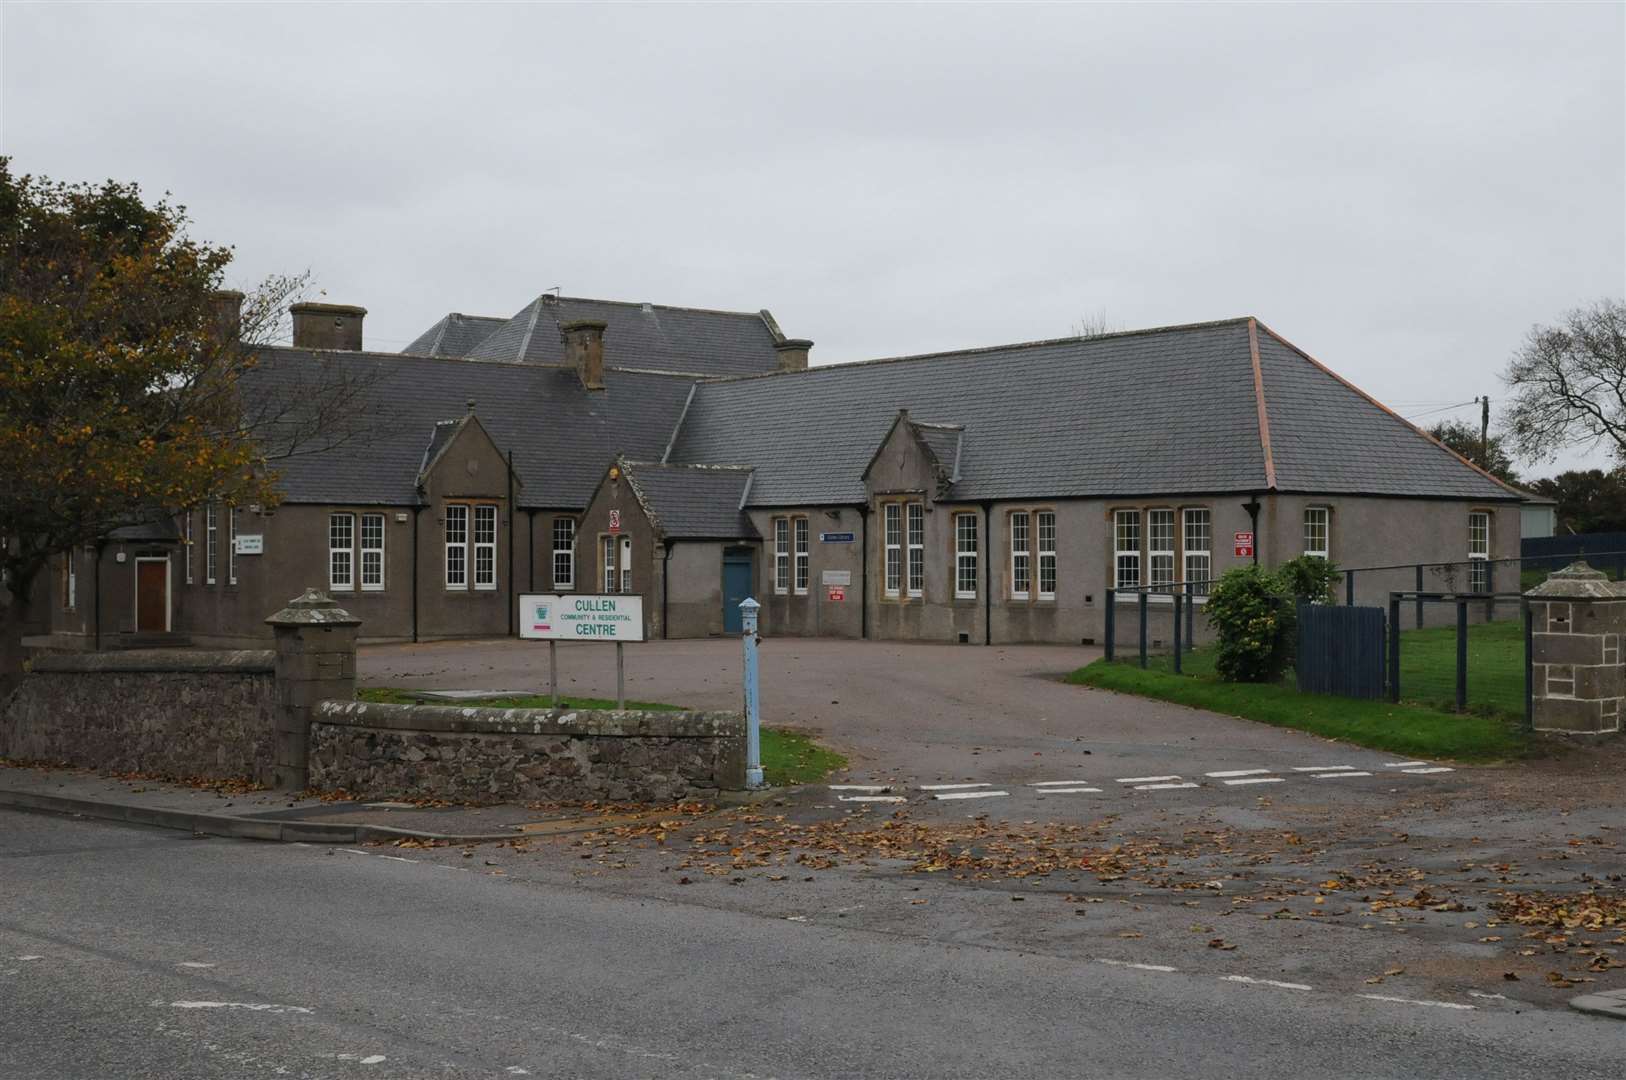 Cullen Community and Residential Centre is set to host Cullen Connected's open meeting.